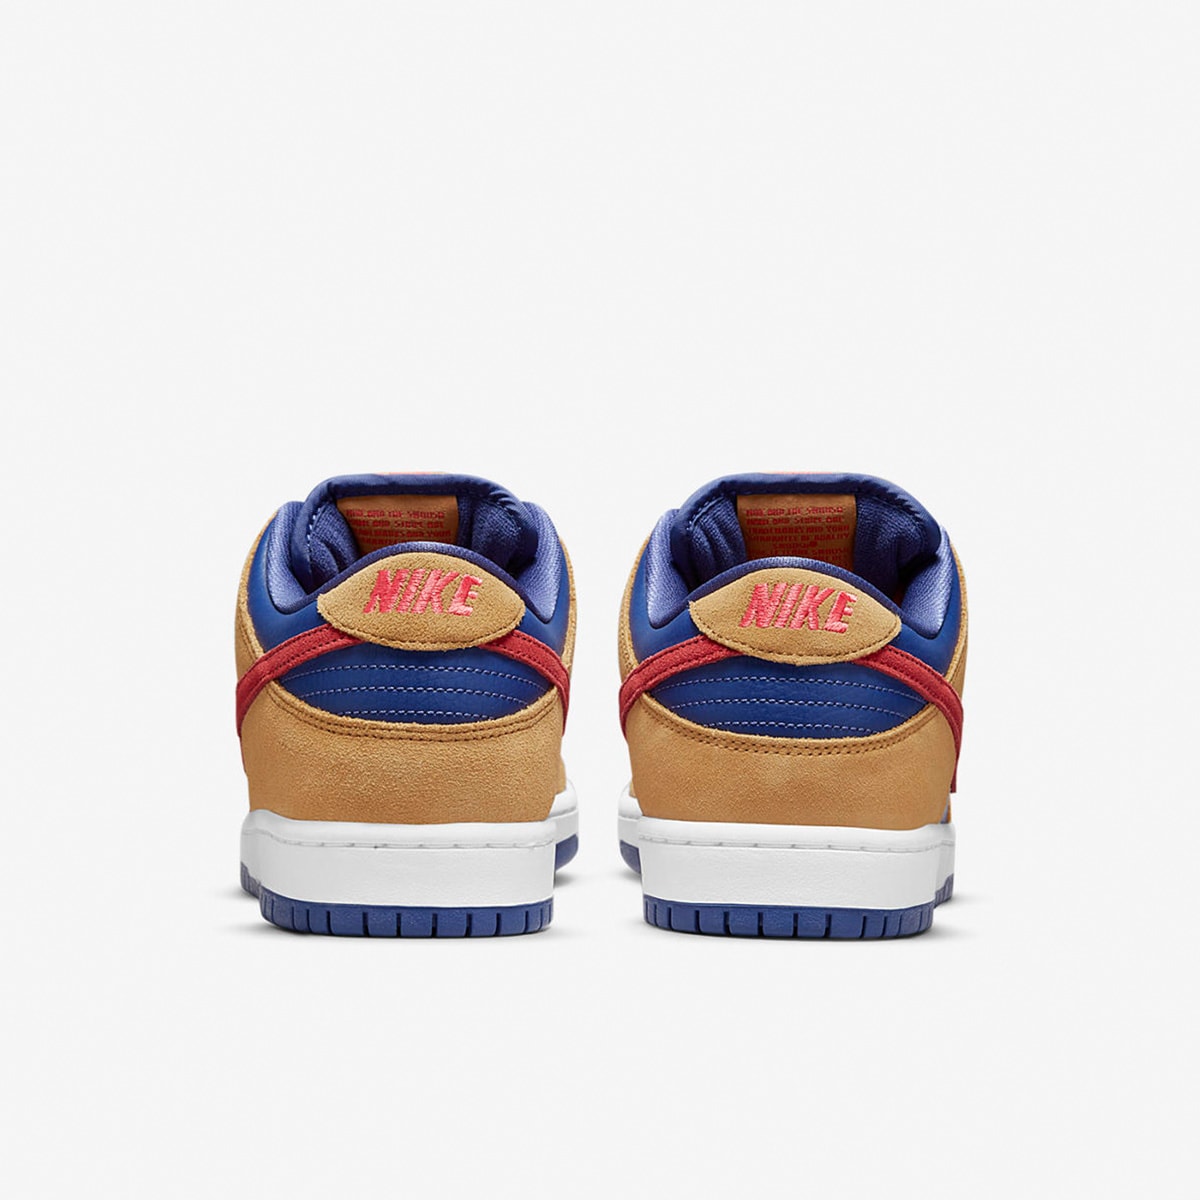 Nike SB Dunk Low Pro (Wheat, Red, Purple & White) | END. Launches